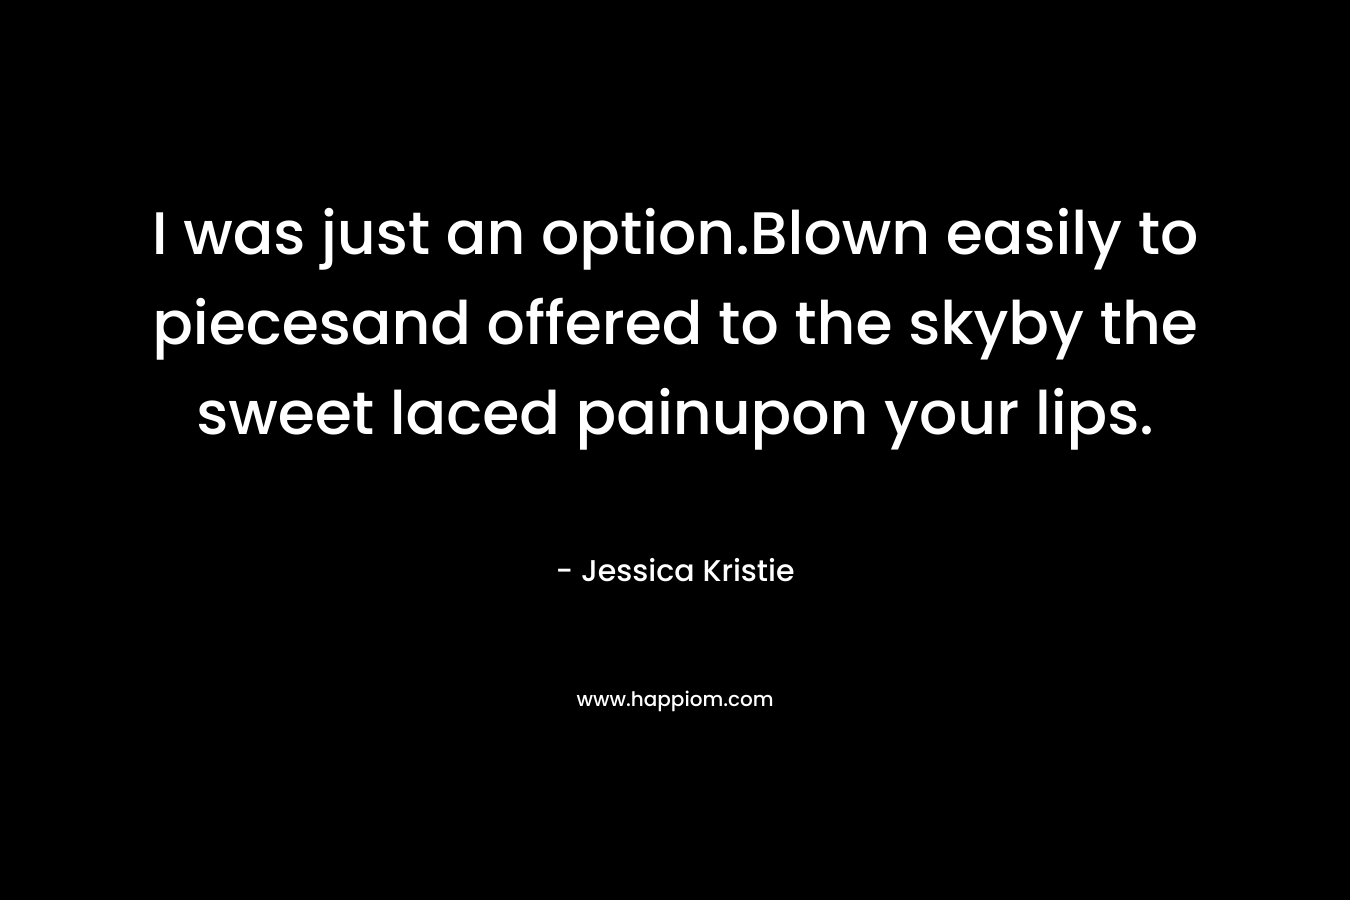 I was just an option.Blown easily to piecesand offered to the skyby the sweet laced painupon your lips. – Jessica Kristie